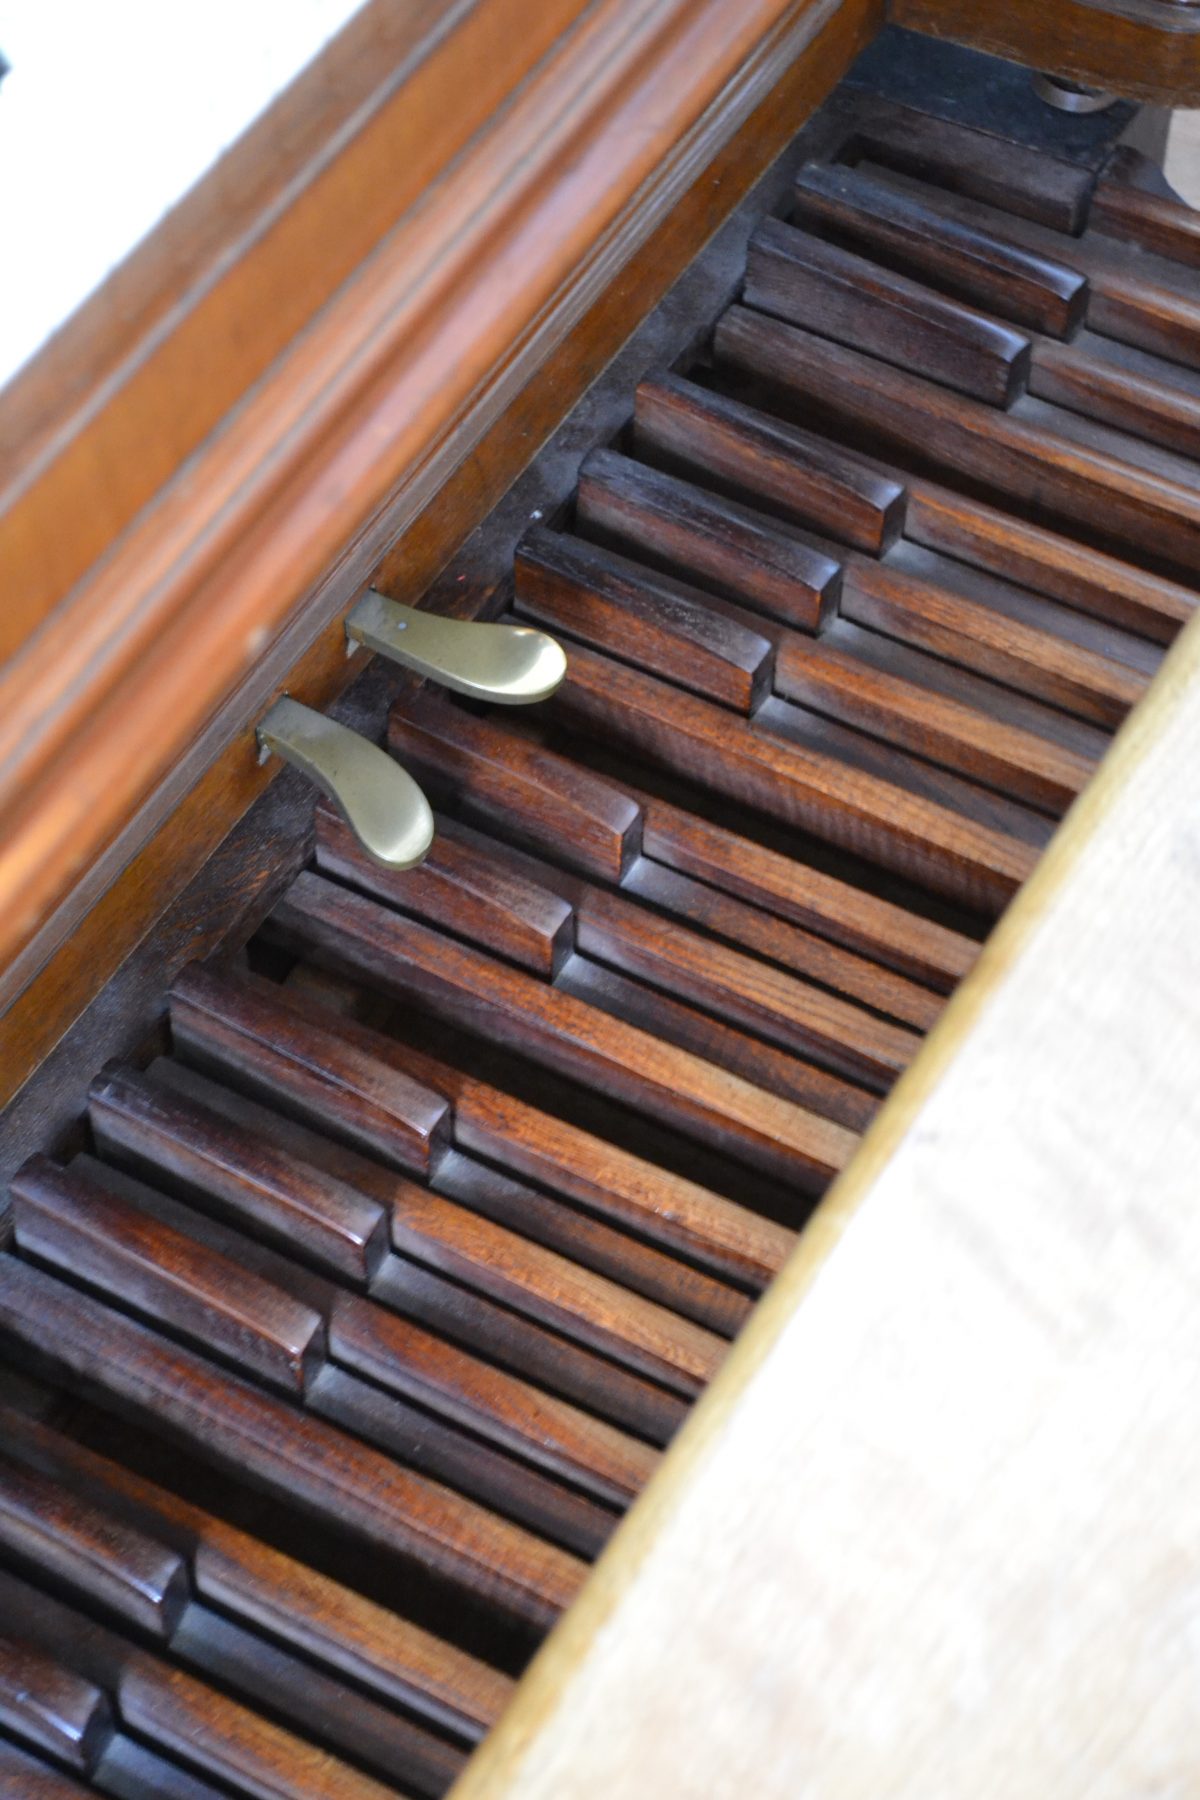 Pedal Piano – Eastman School of Music